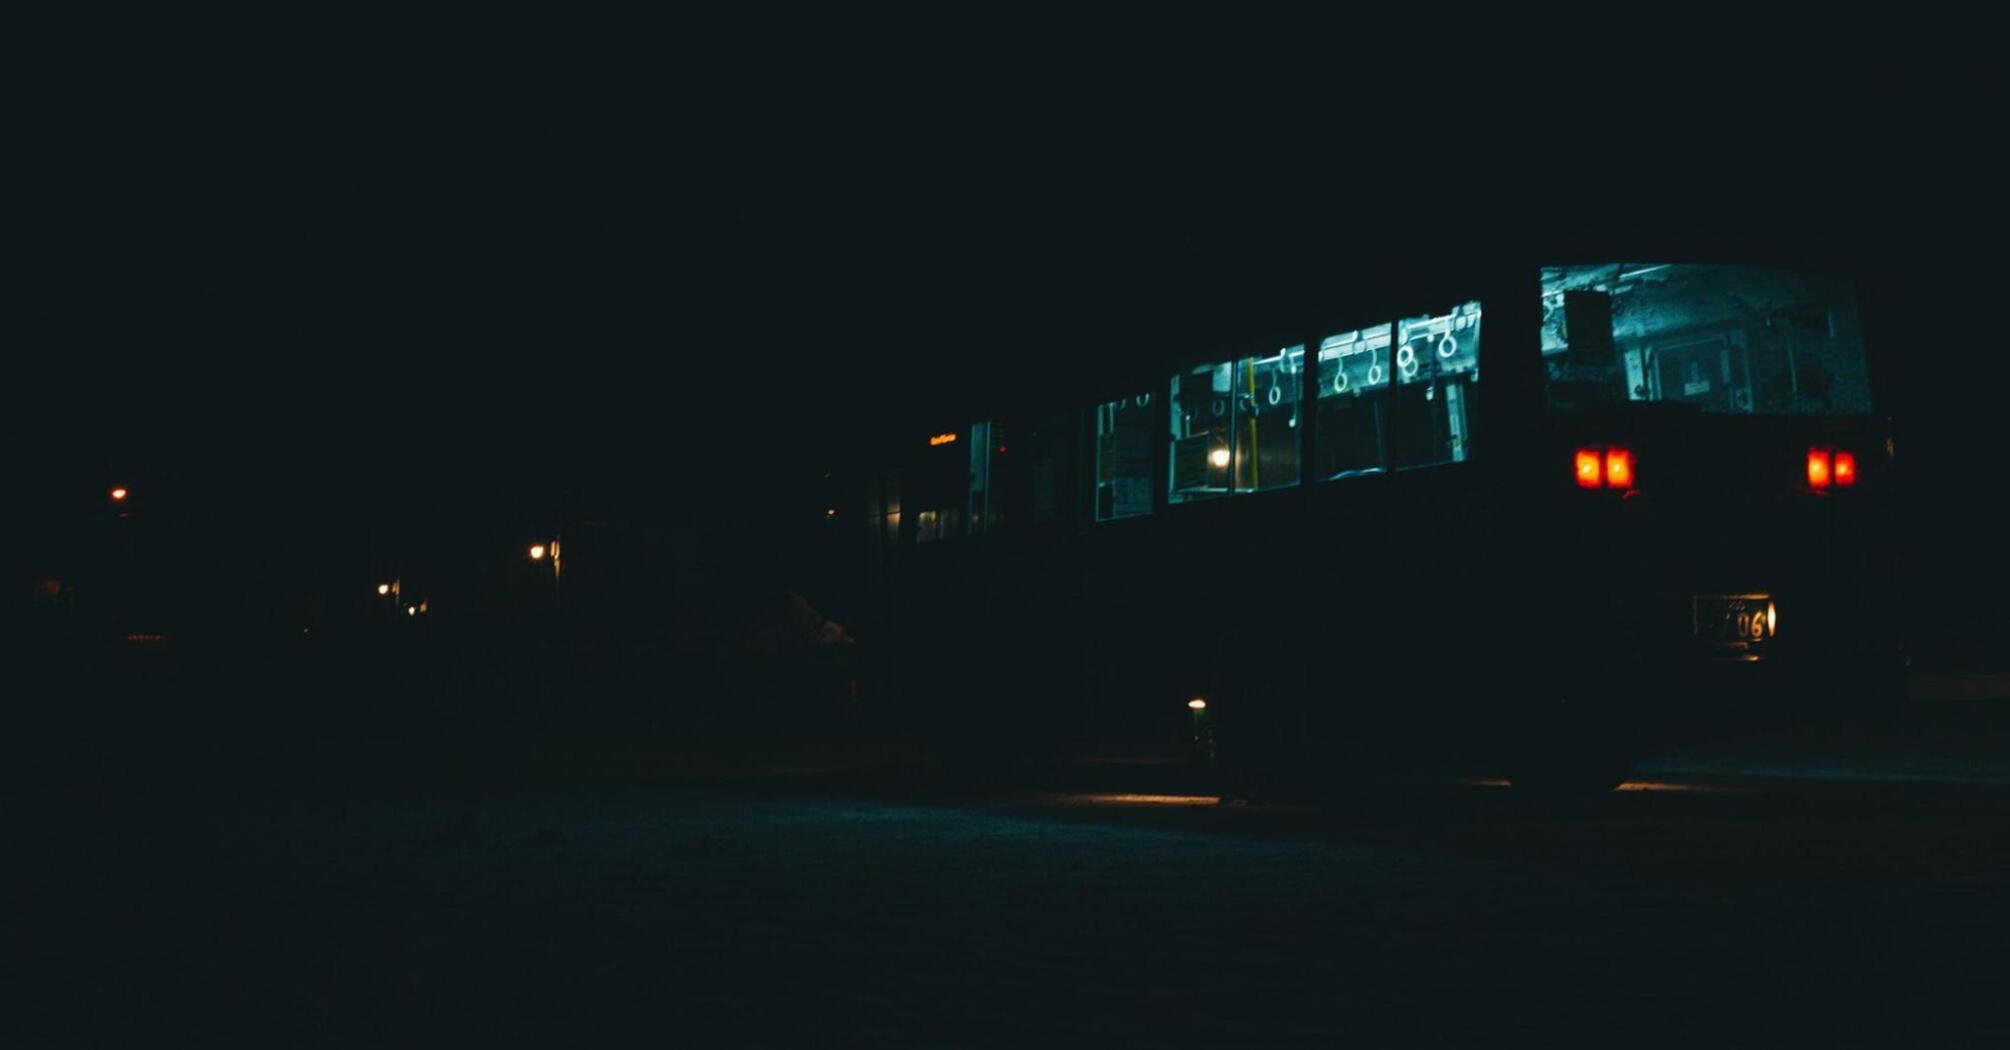 A bus illuminated at night, driving through a dark area with streetlights in the background